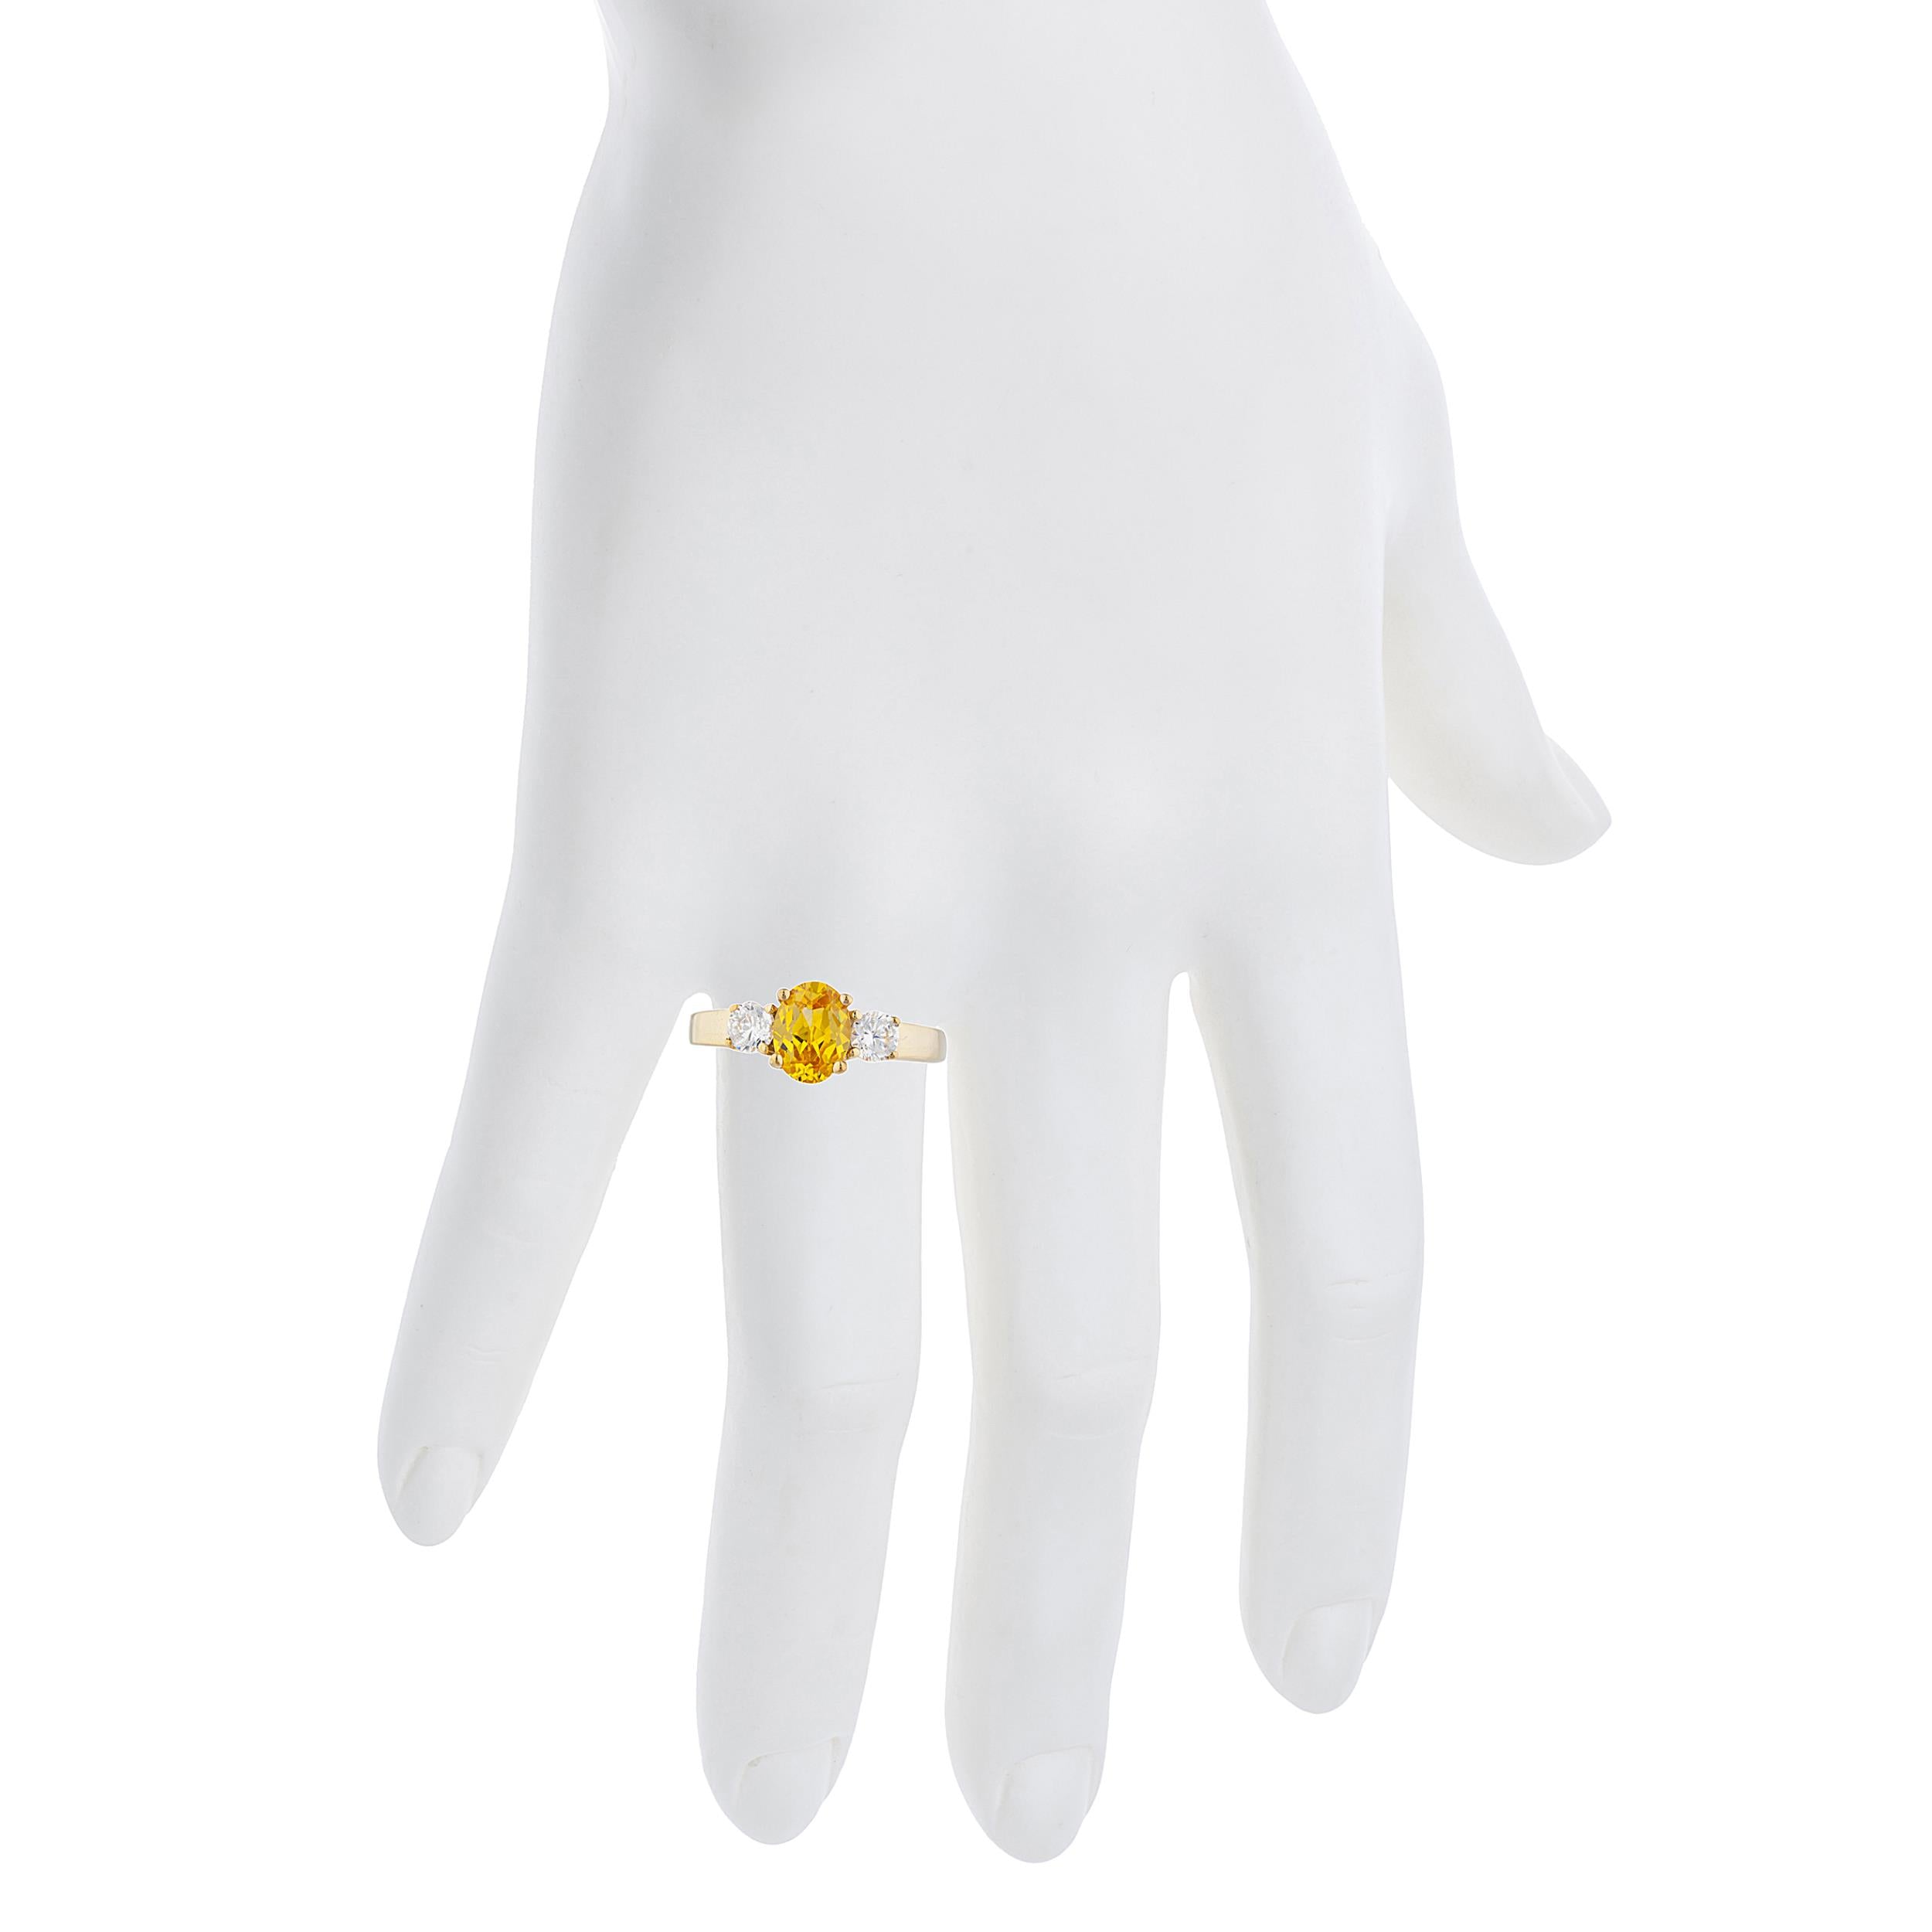 14Kt Gold 2 Ct Yellow Citrine & Zirconia Oval Ring